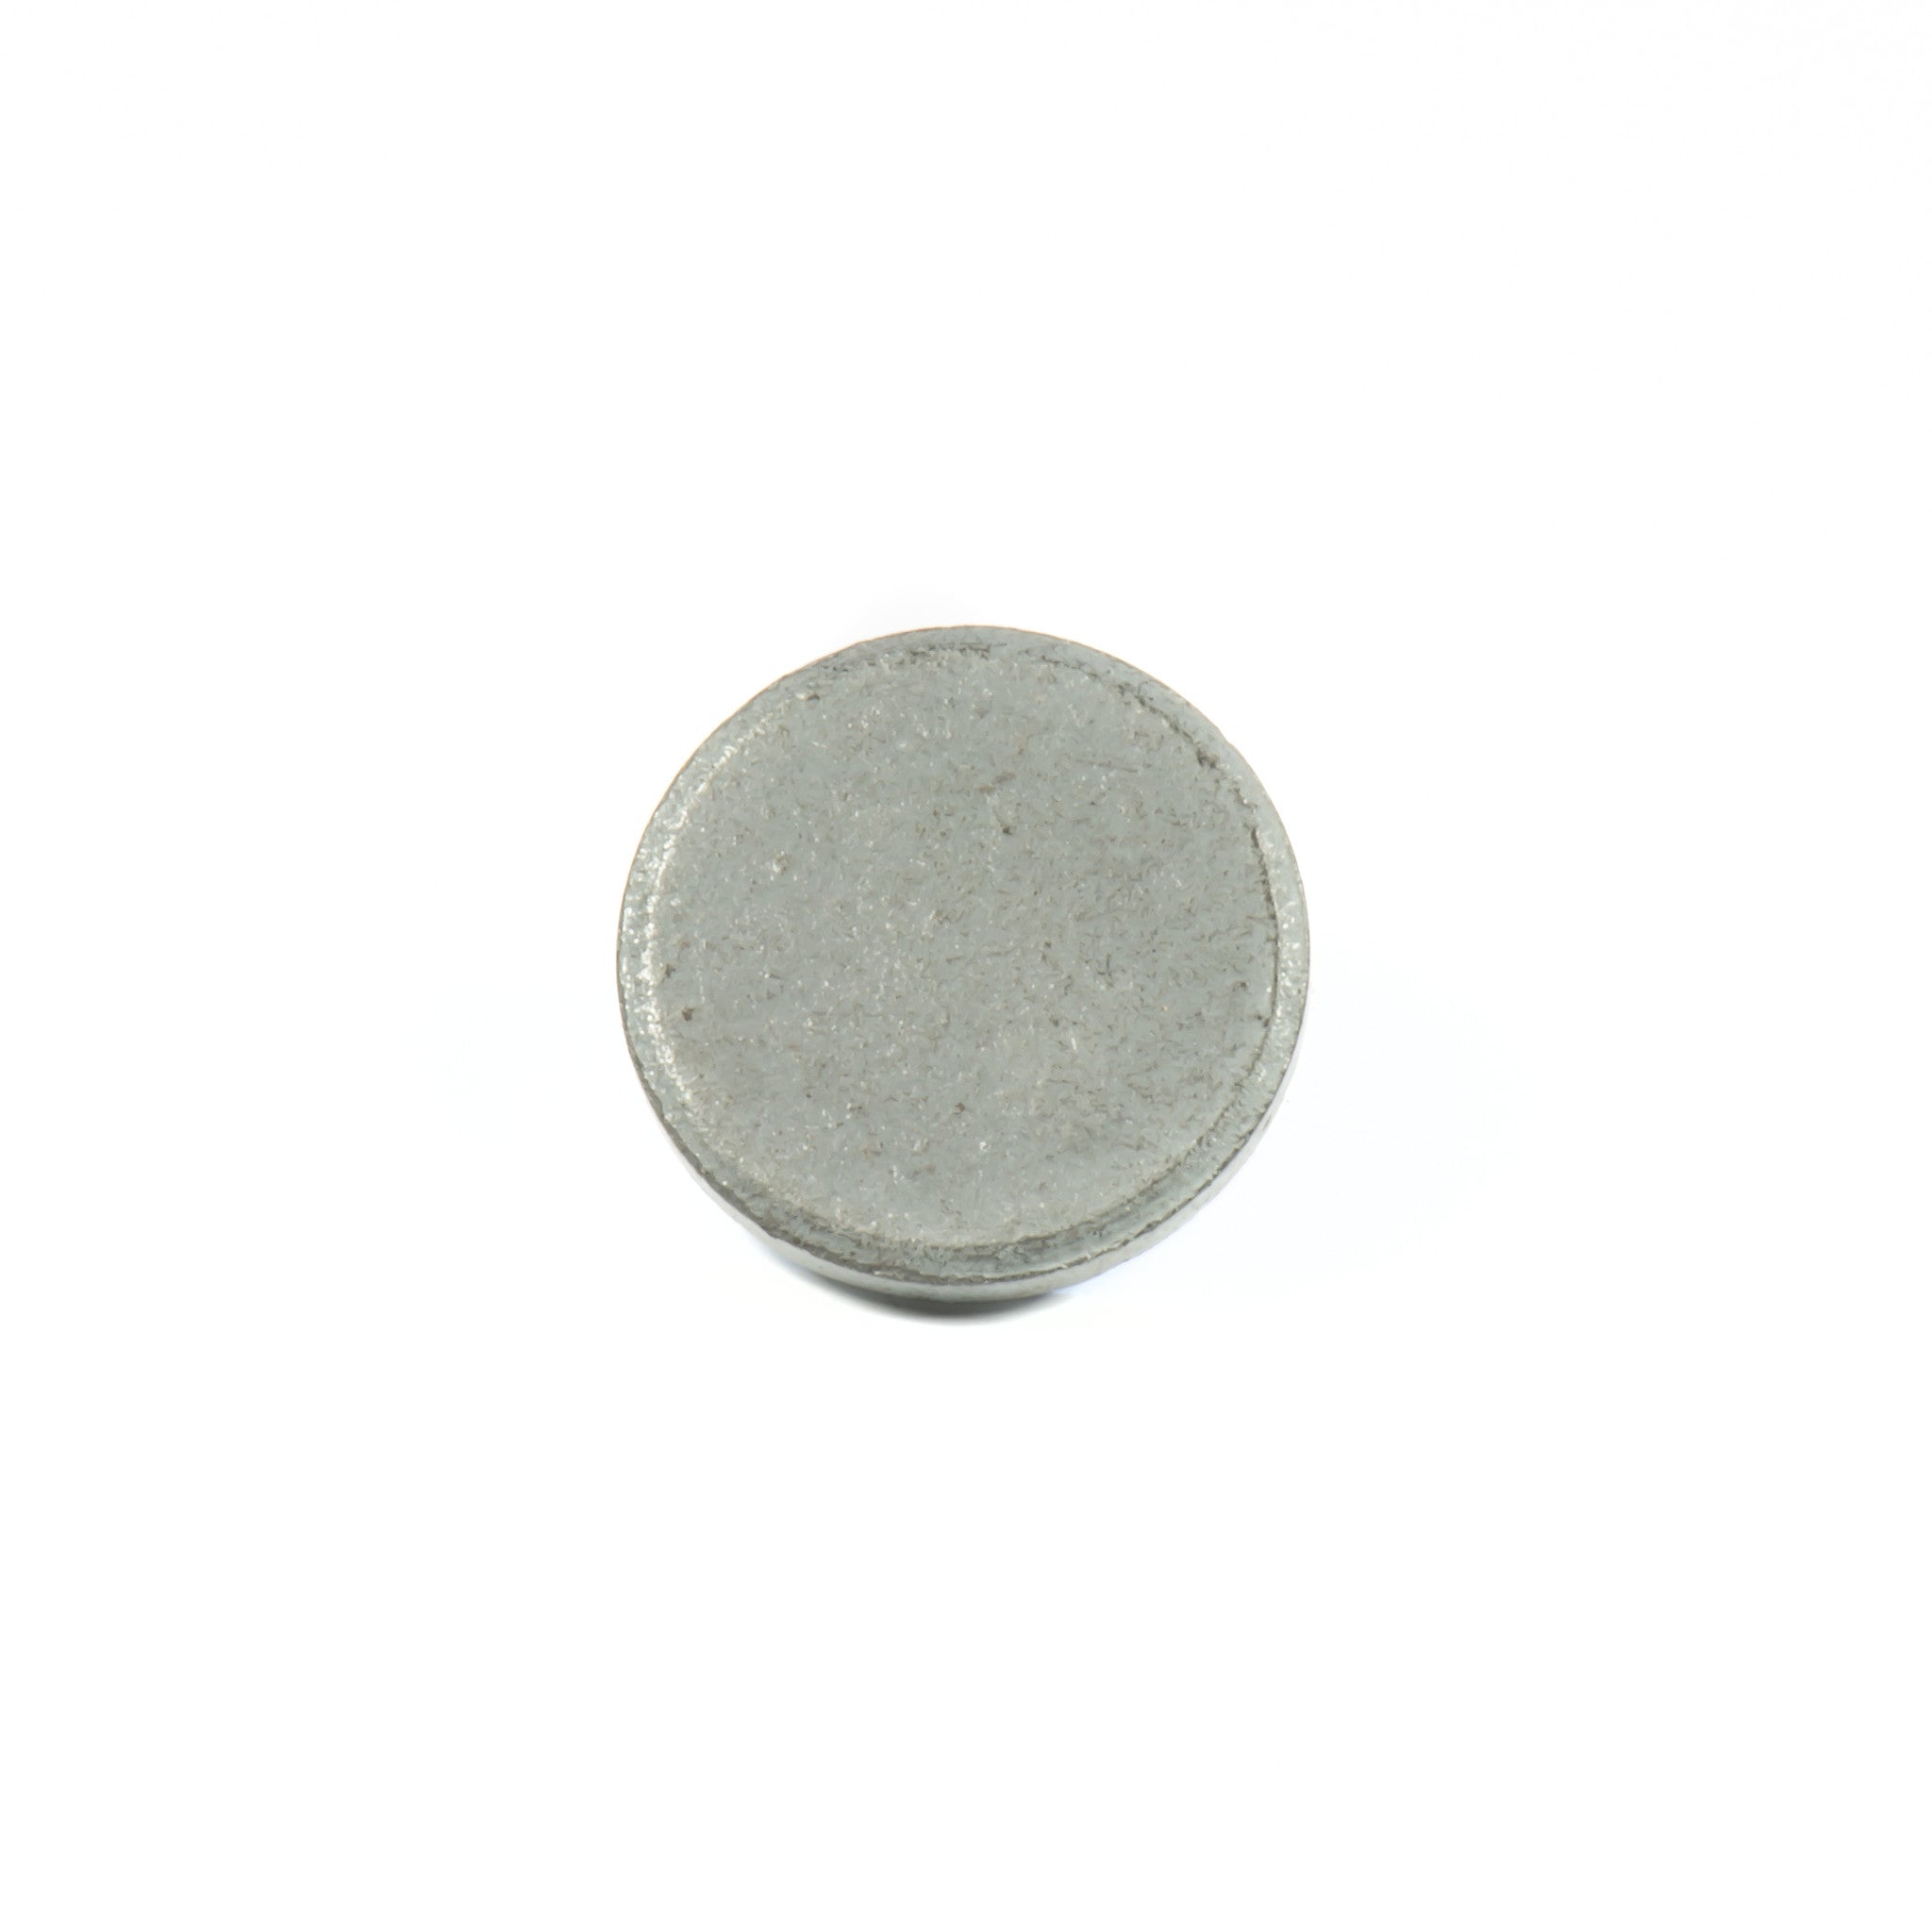 38mm, 55mm and 77mm Fridge Magnet - Spares